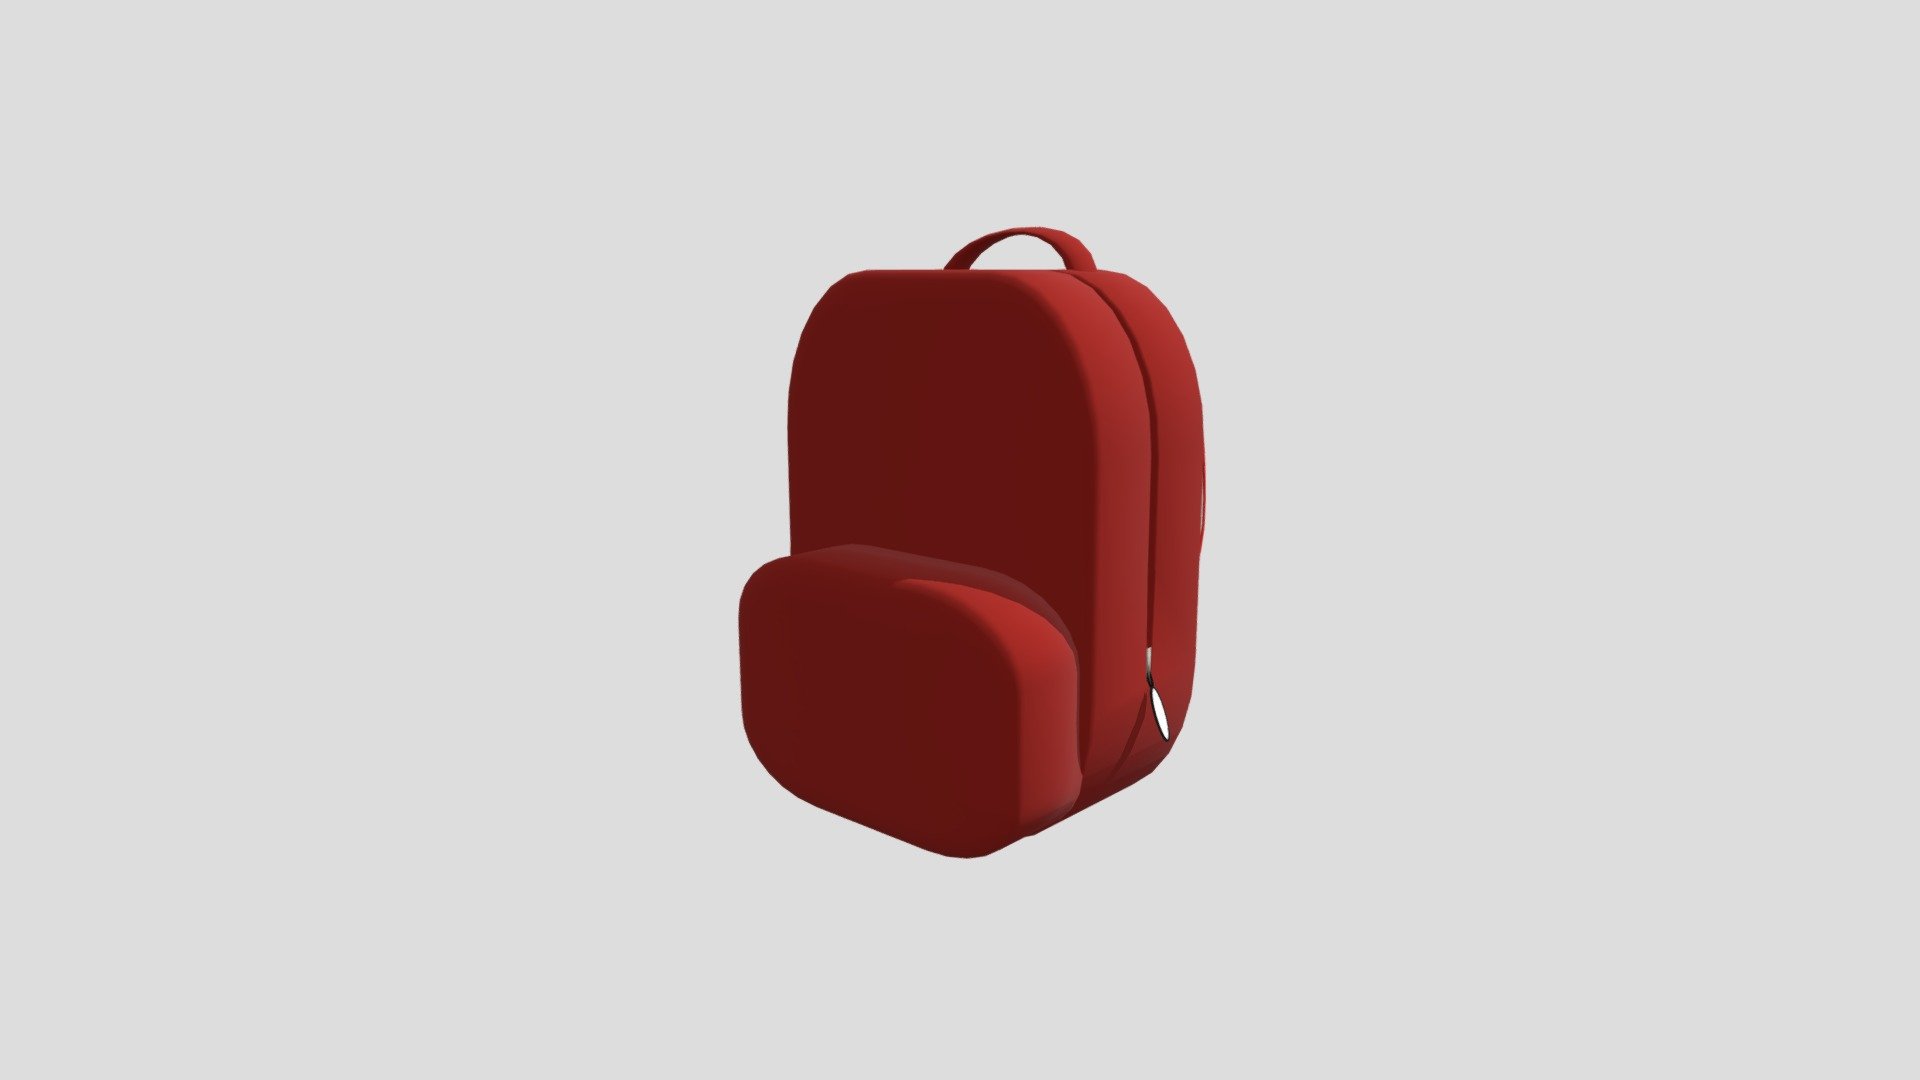 Red Backpack! Packed for a Big Journey ahead!

Model Made By AwesomeAmbz

Created In Blender2.82 - Red Backpack - Download Free 3D model by AwesomeAmbz 3d model